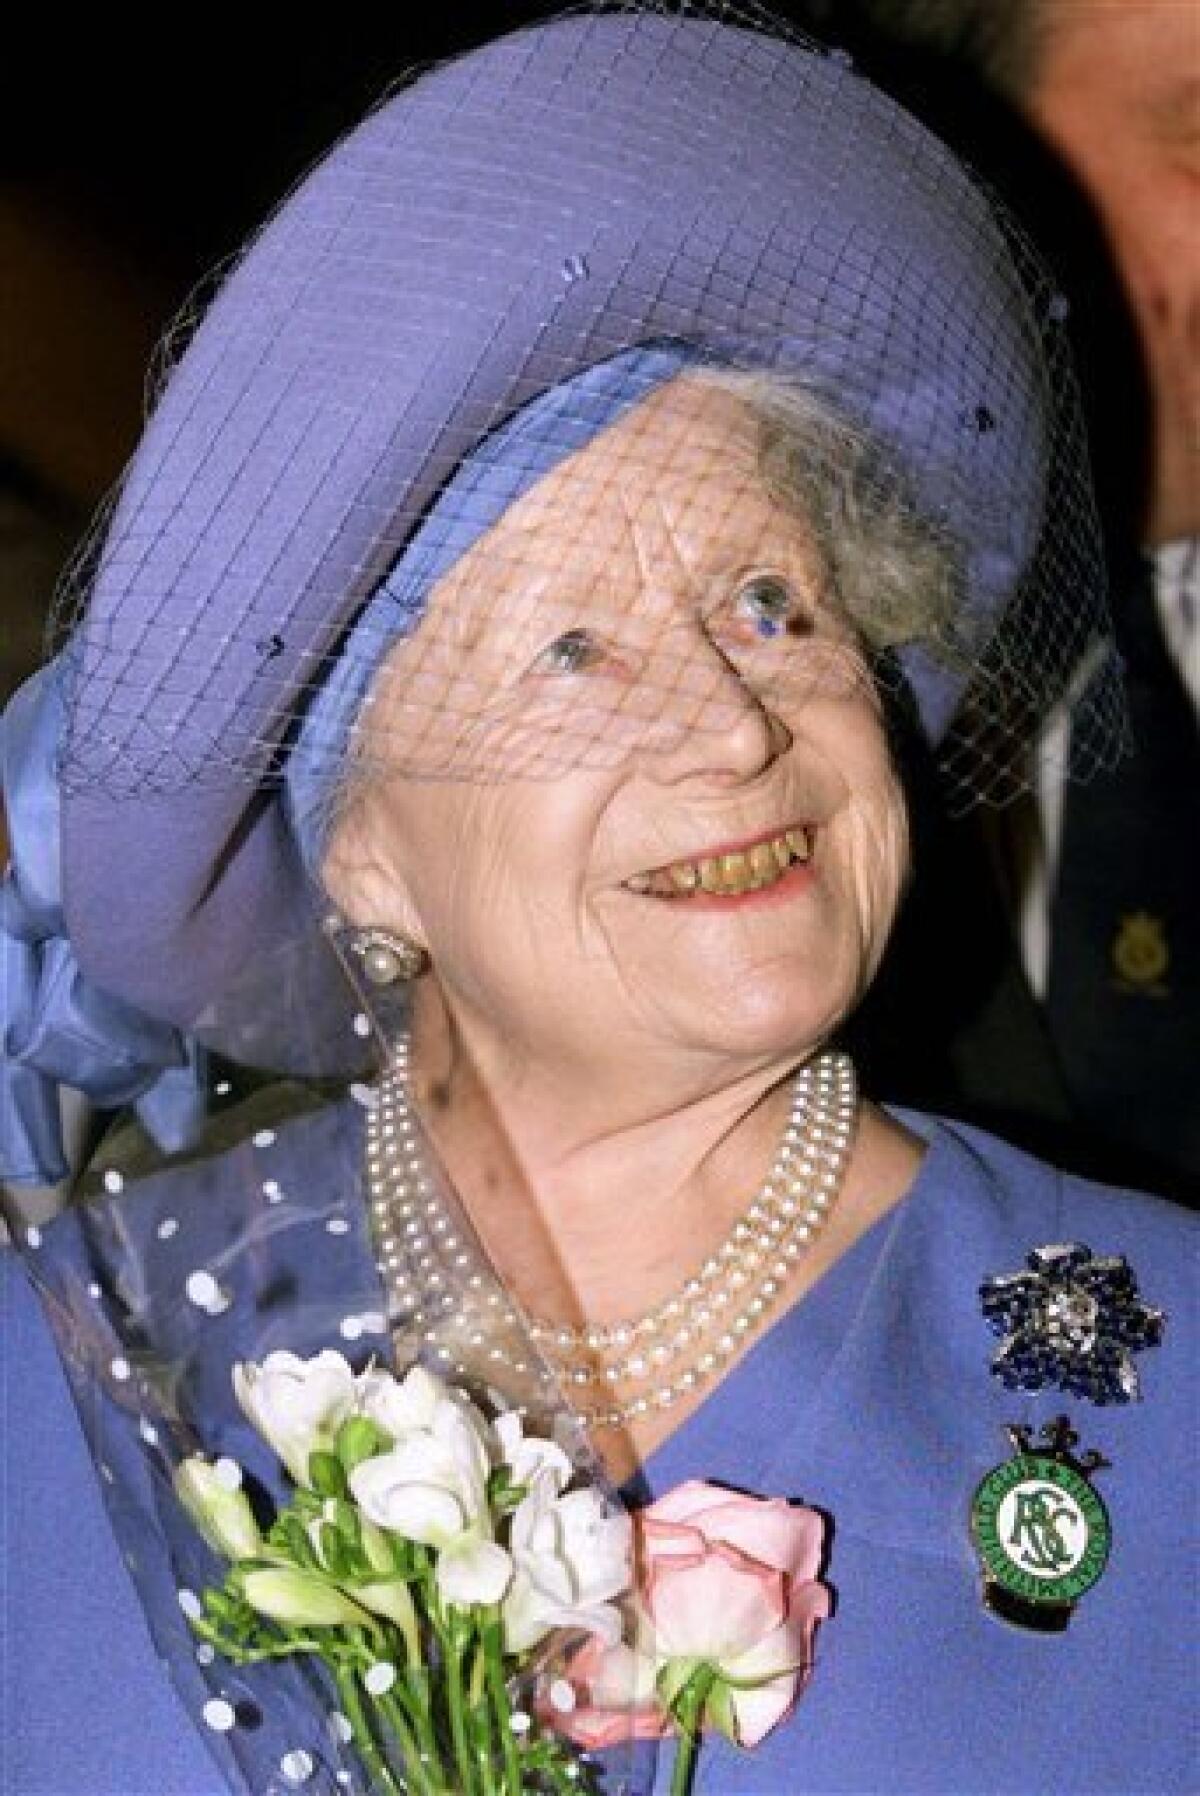 FILE - In this Dec. 1, 1998 file photo. Britain's Queen Elizabeth, the Queen Mother, reacts, during the Royal Smithfield Show in London, England. She was known for much of her life as the queen mother. And according to her official biography, she detested it. Horrible name," she wrote in a 1953 letter to her daughter, Queen Elizabeth II. (AP Photo/Kevin Lamarque, File)